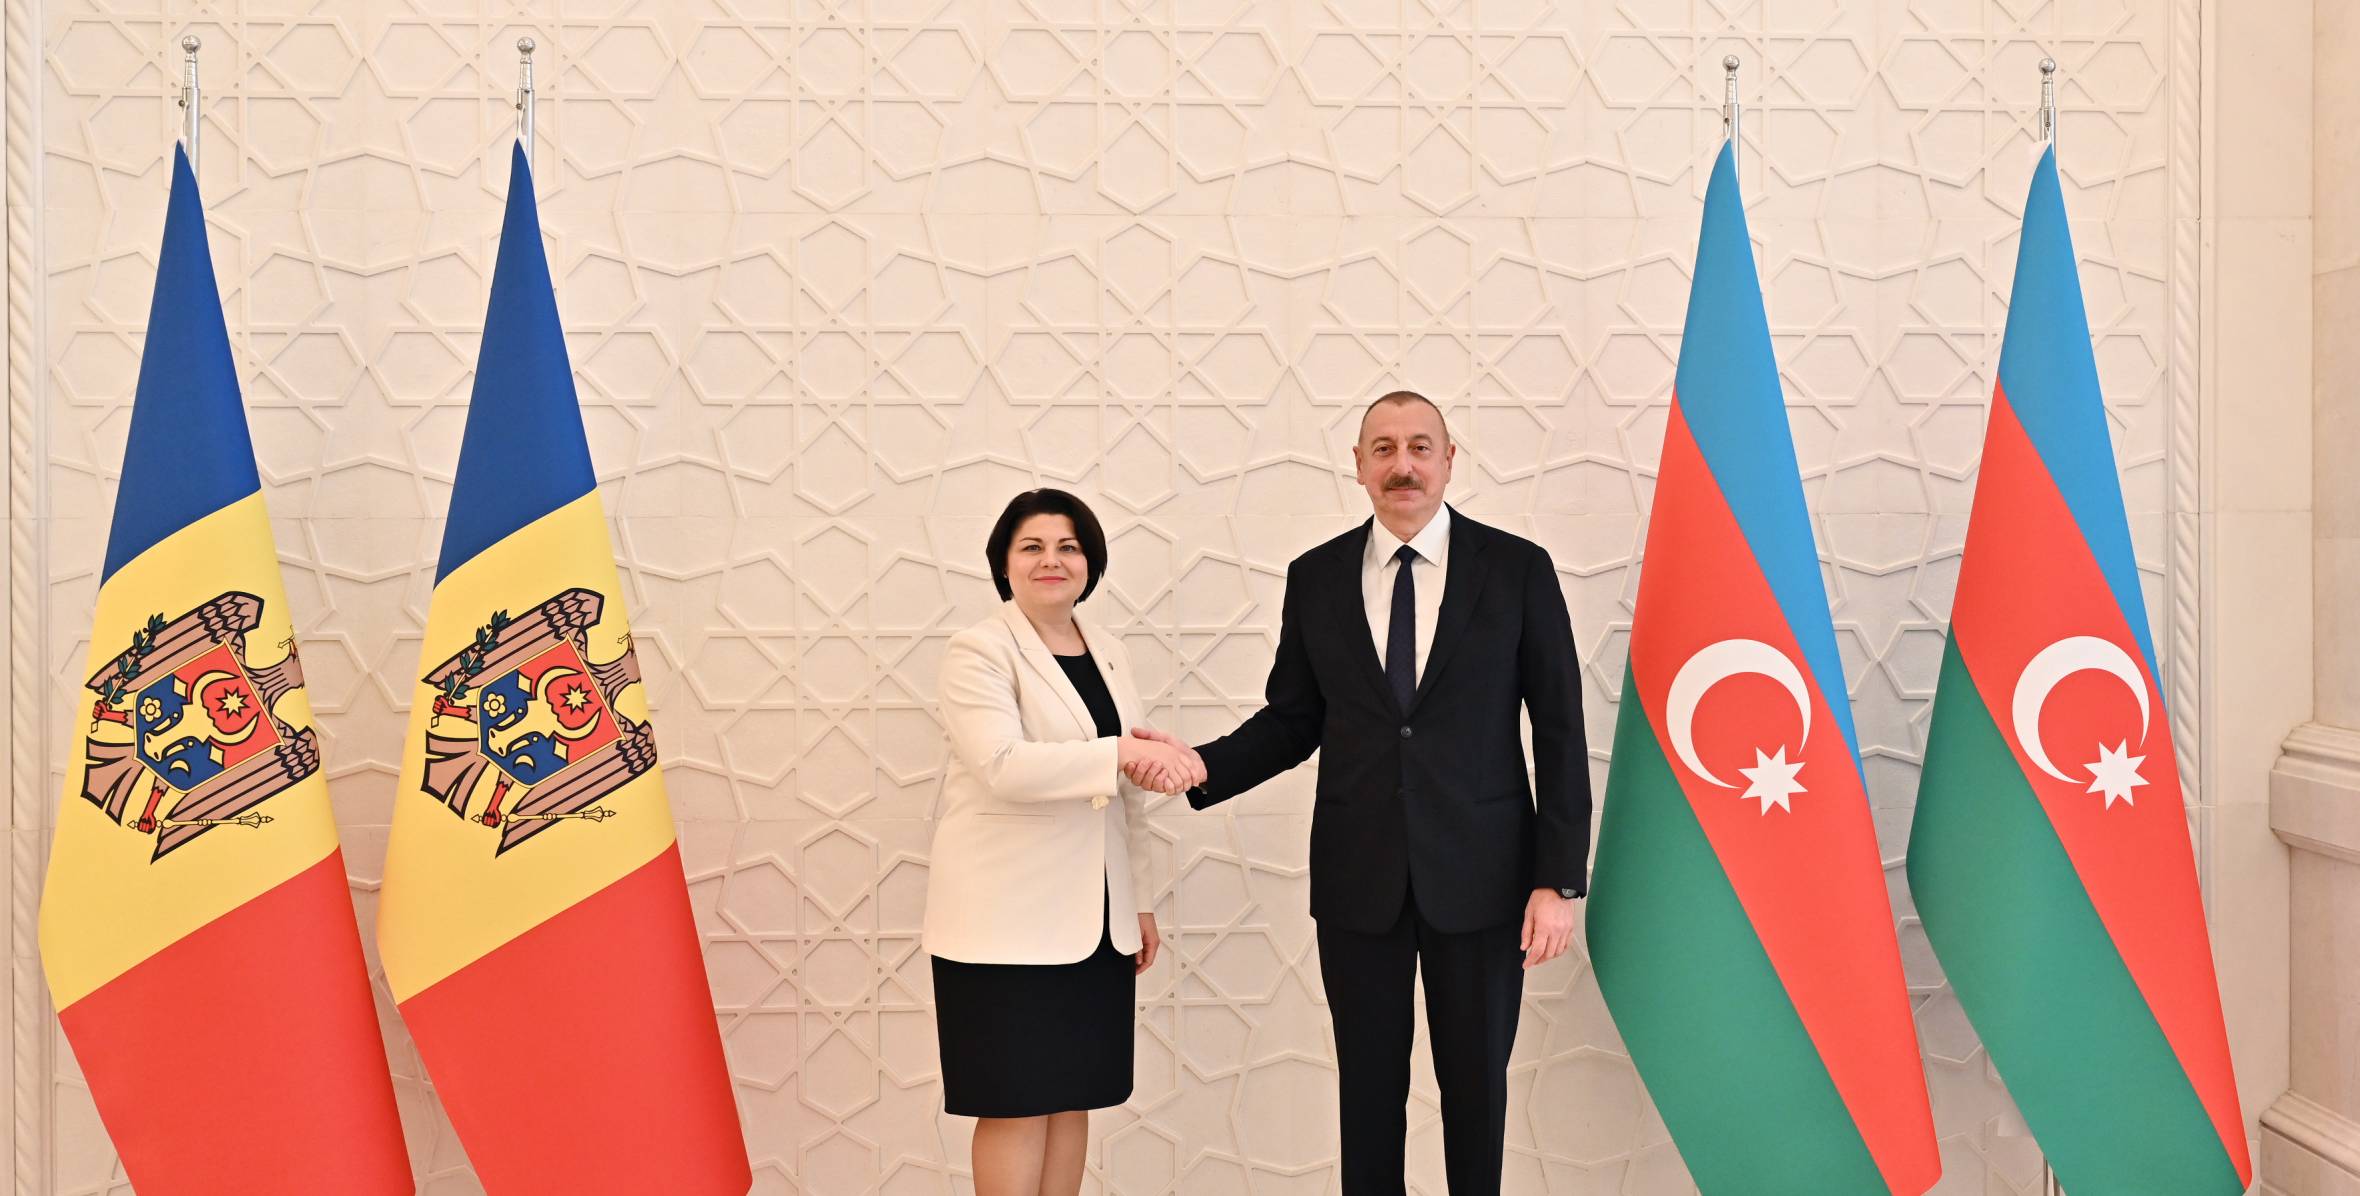 Ilham Aliyev, Prime Minister of Moldova, held a one-on-one meeting